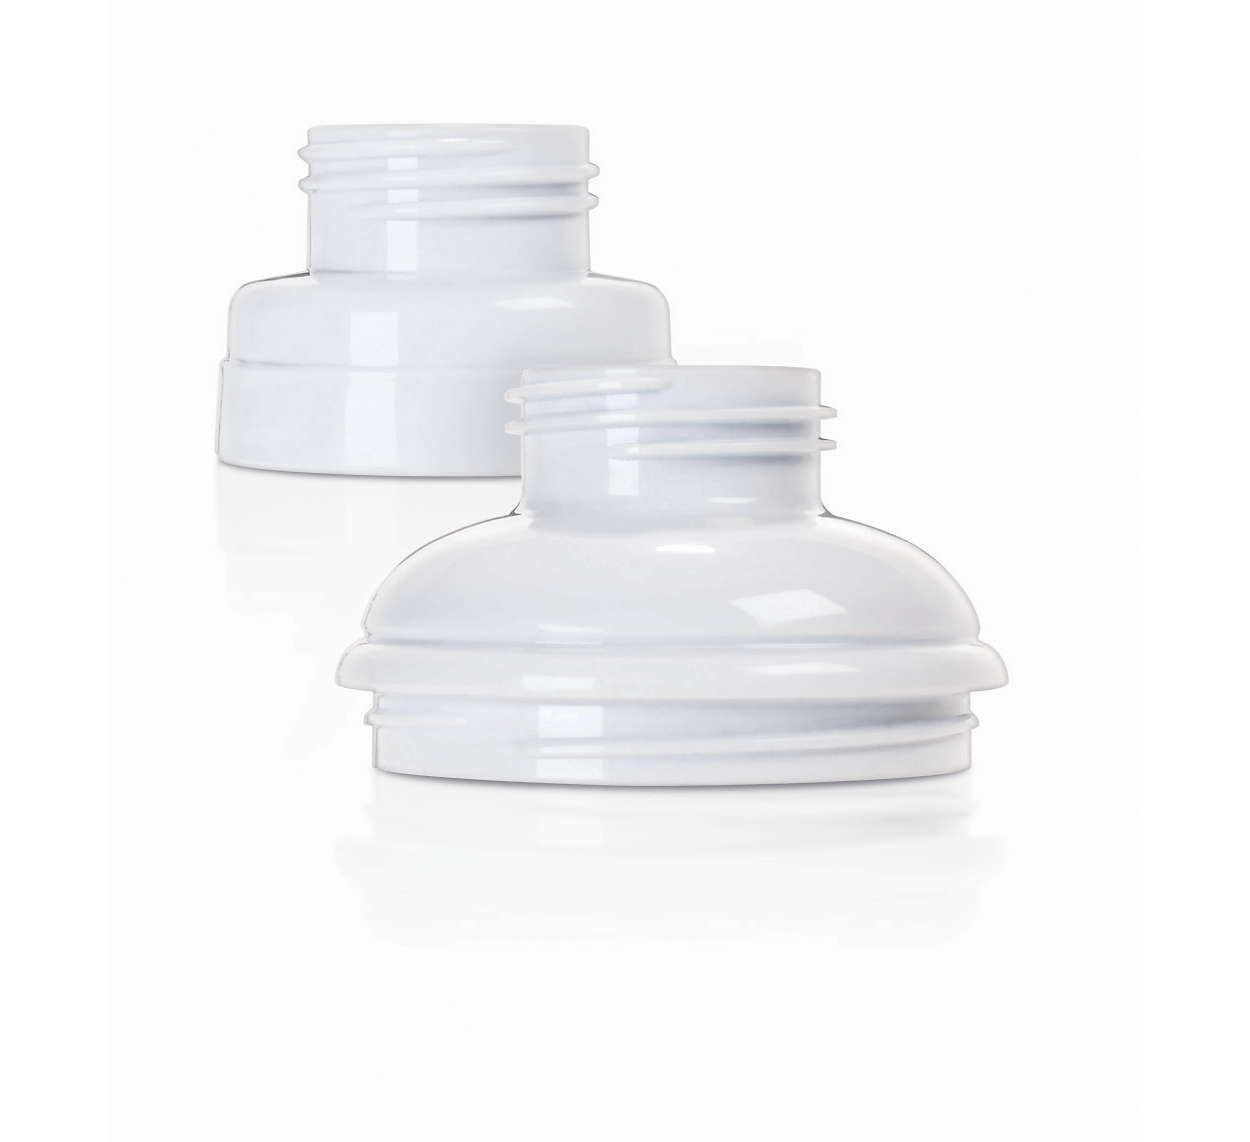 Easily adapts to breast pumps